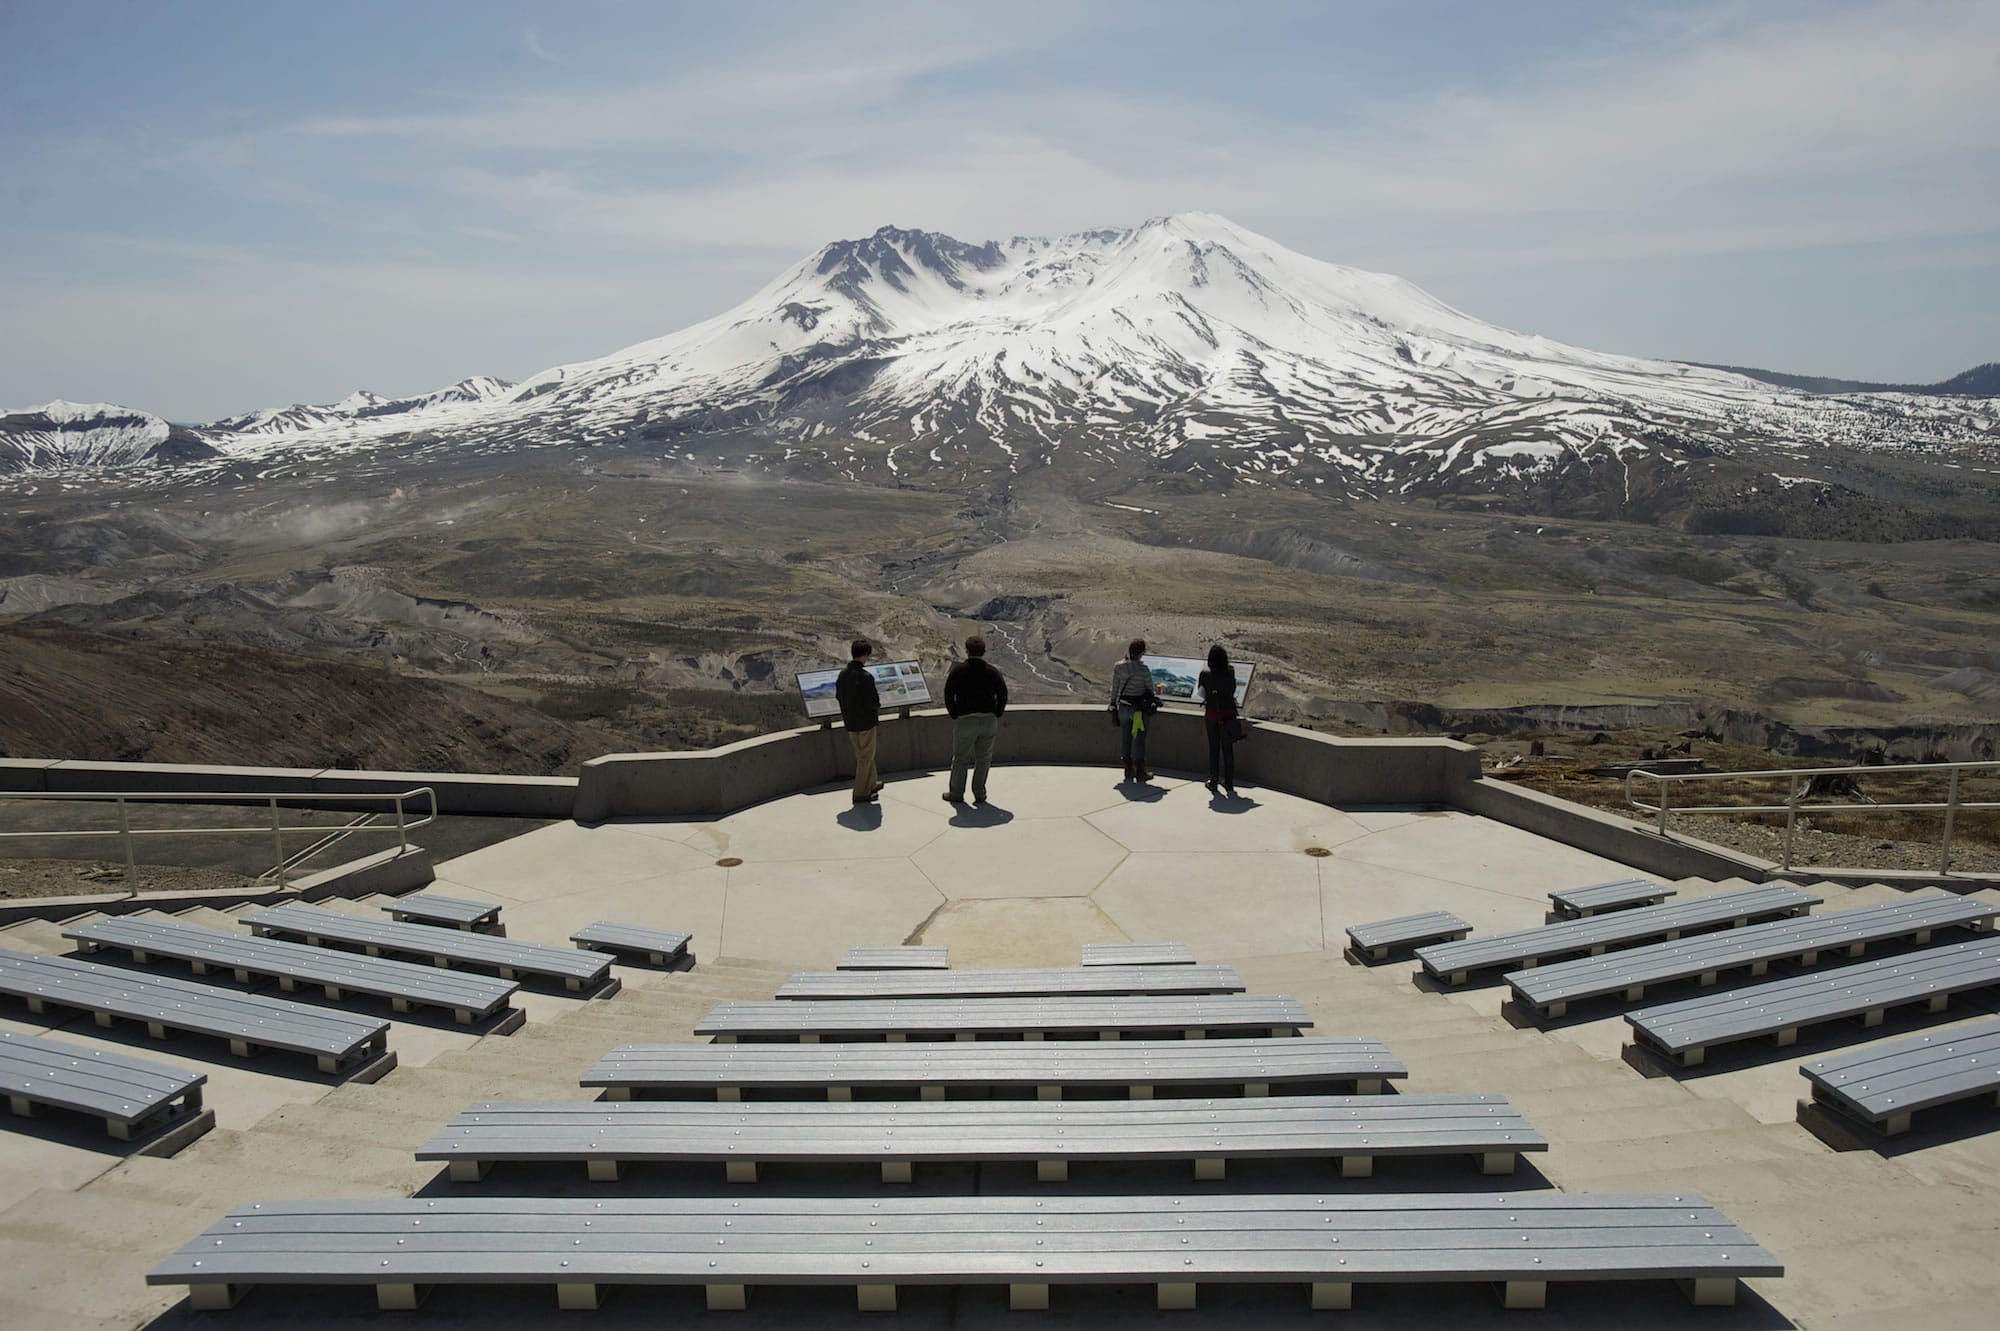 Steven Lane/The Columbian
The Johnston Ridge Observatory amphitheater at Mount St. Helens will host the first show in its Music on the Mountain series July 7.